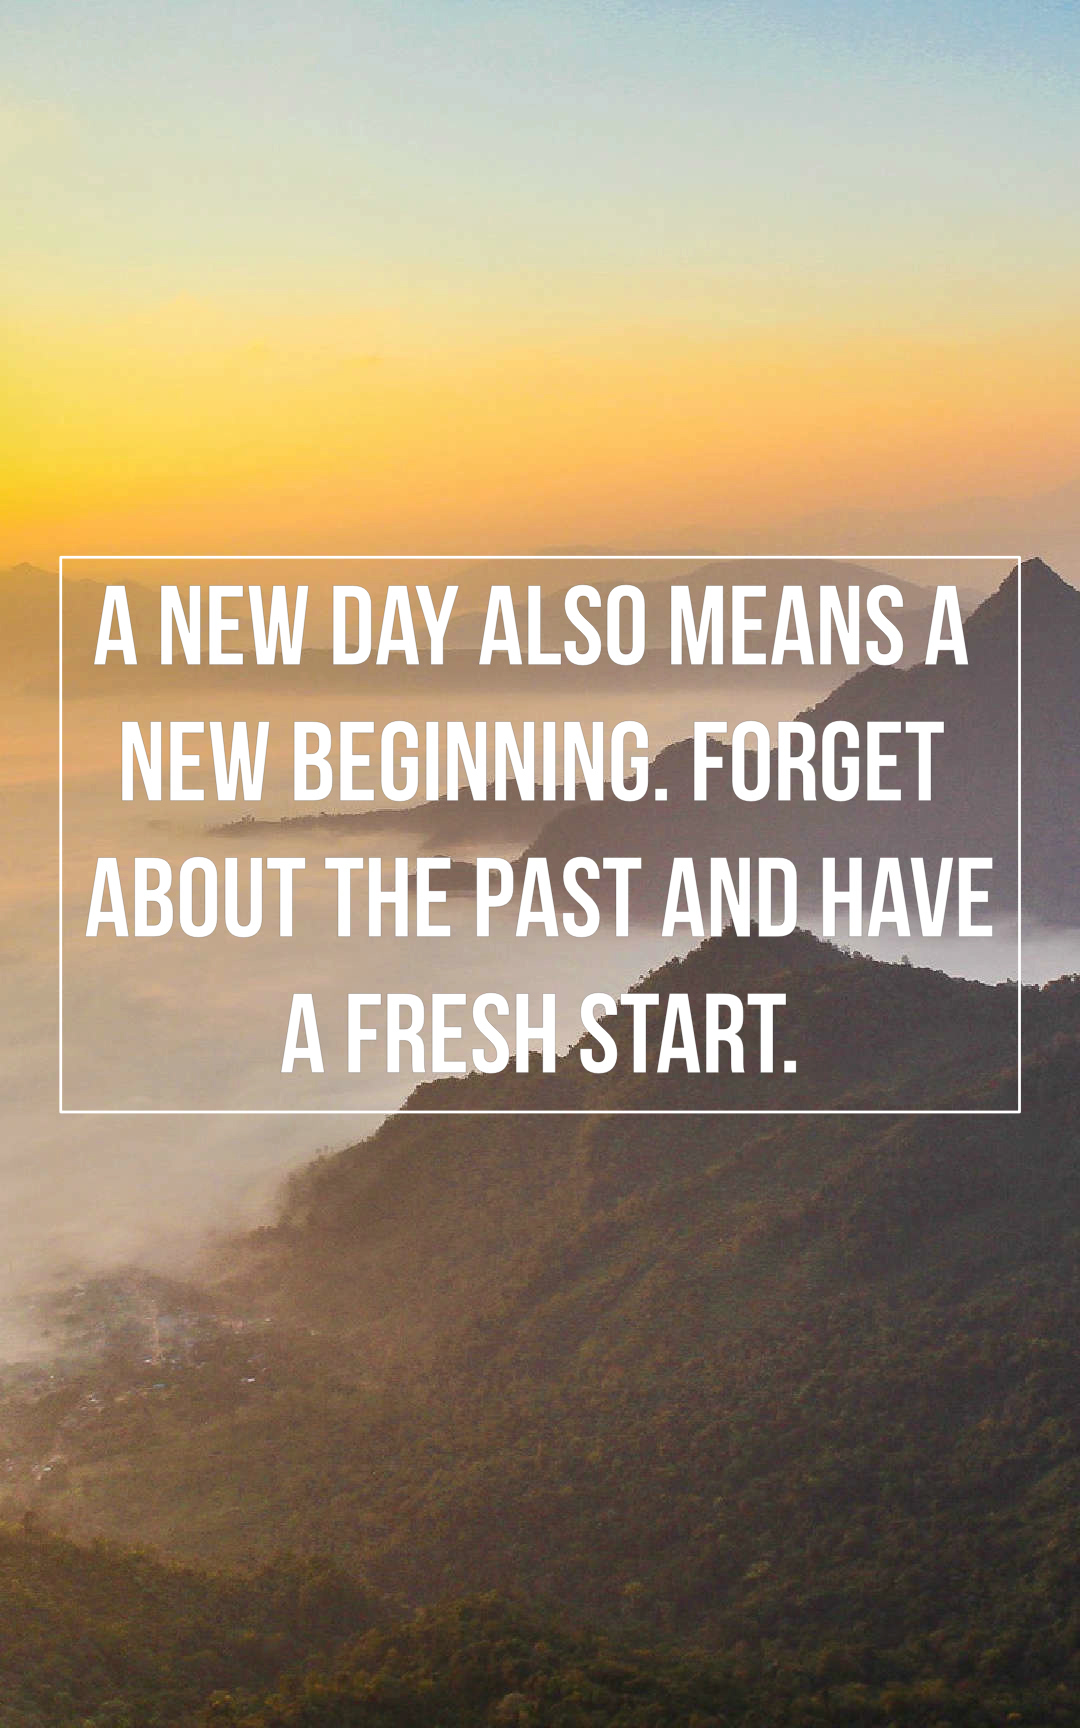 A new day also means a new beginning. Forget about the past and have a fresh start.